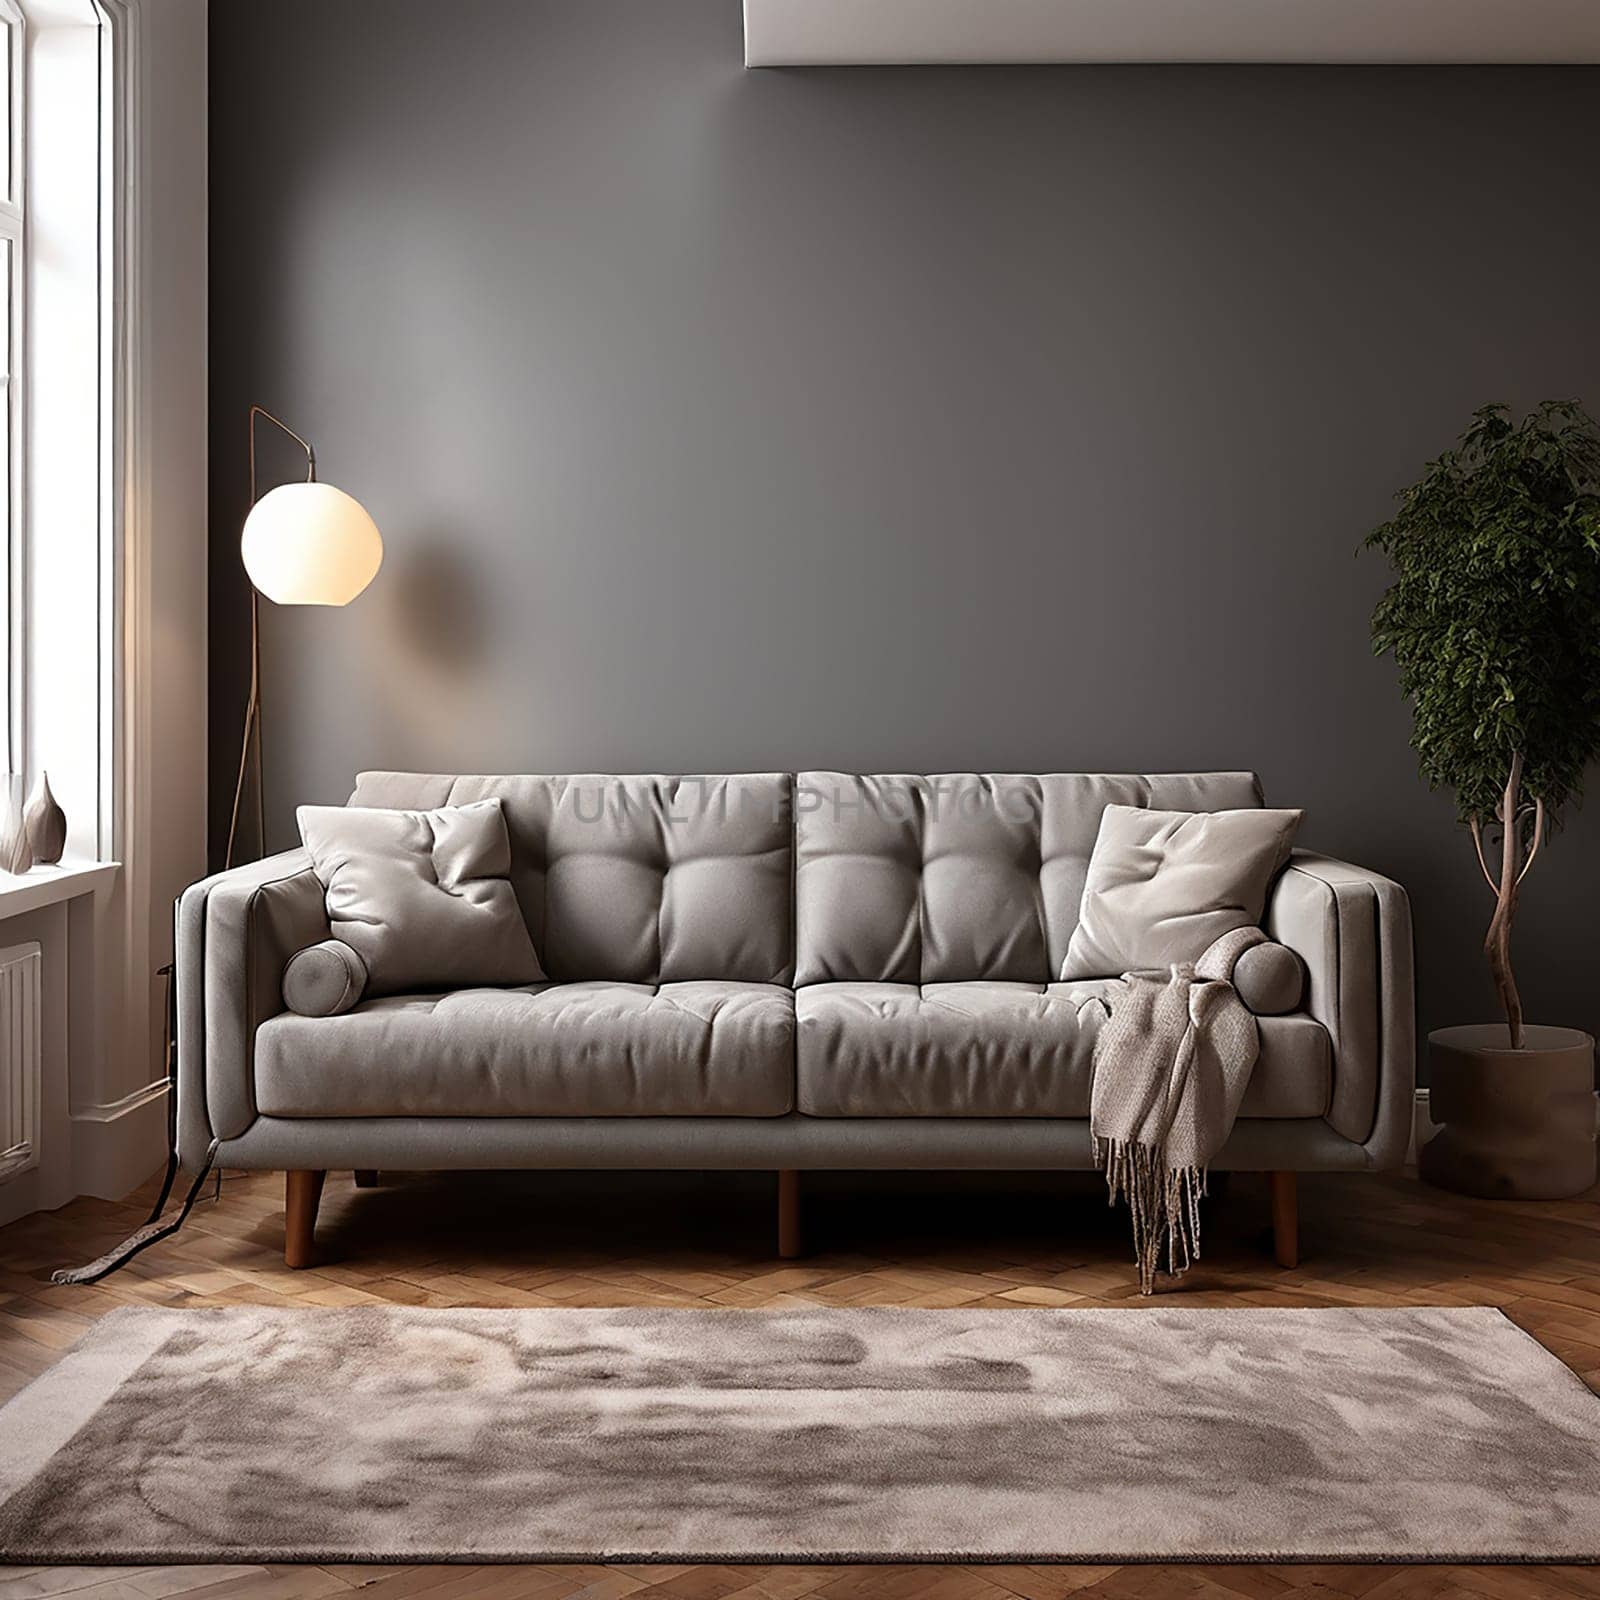 Sofa Serenity: Creating a Tranquil Living Room with Copy Space by Petrichor